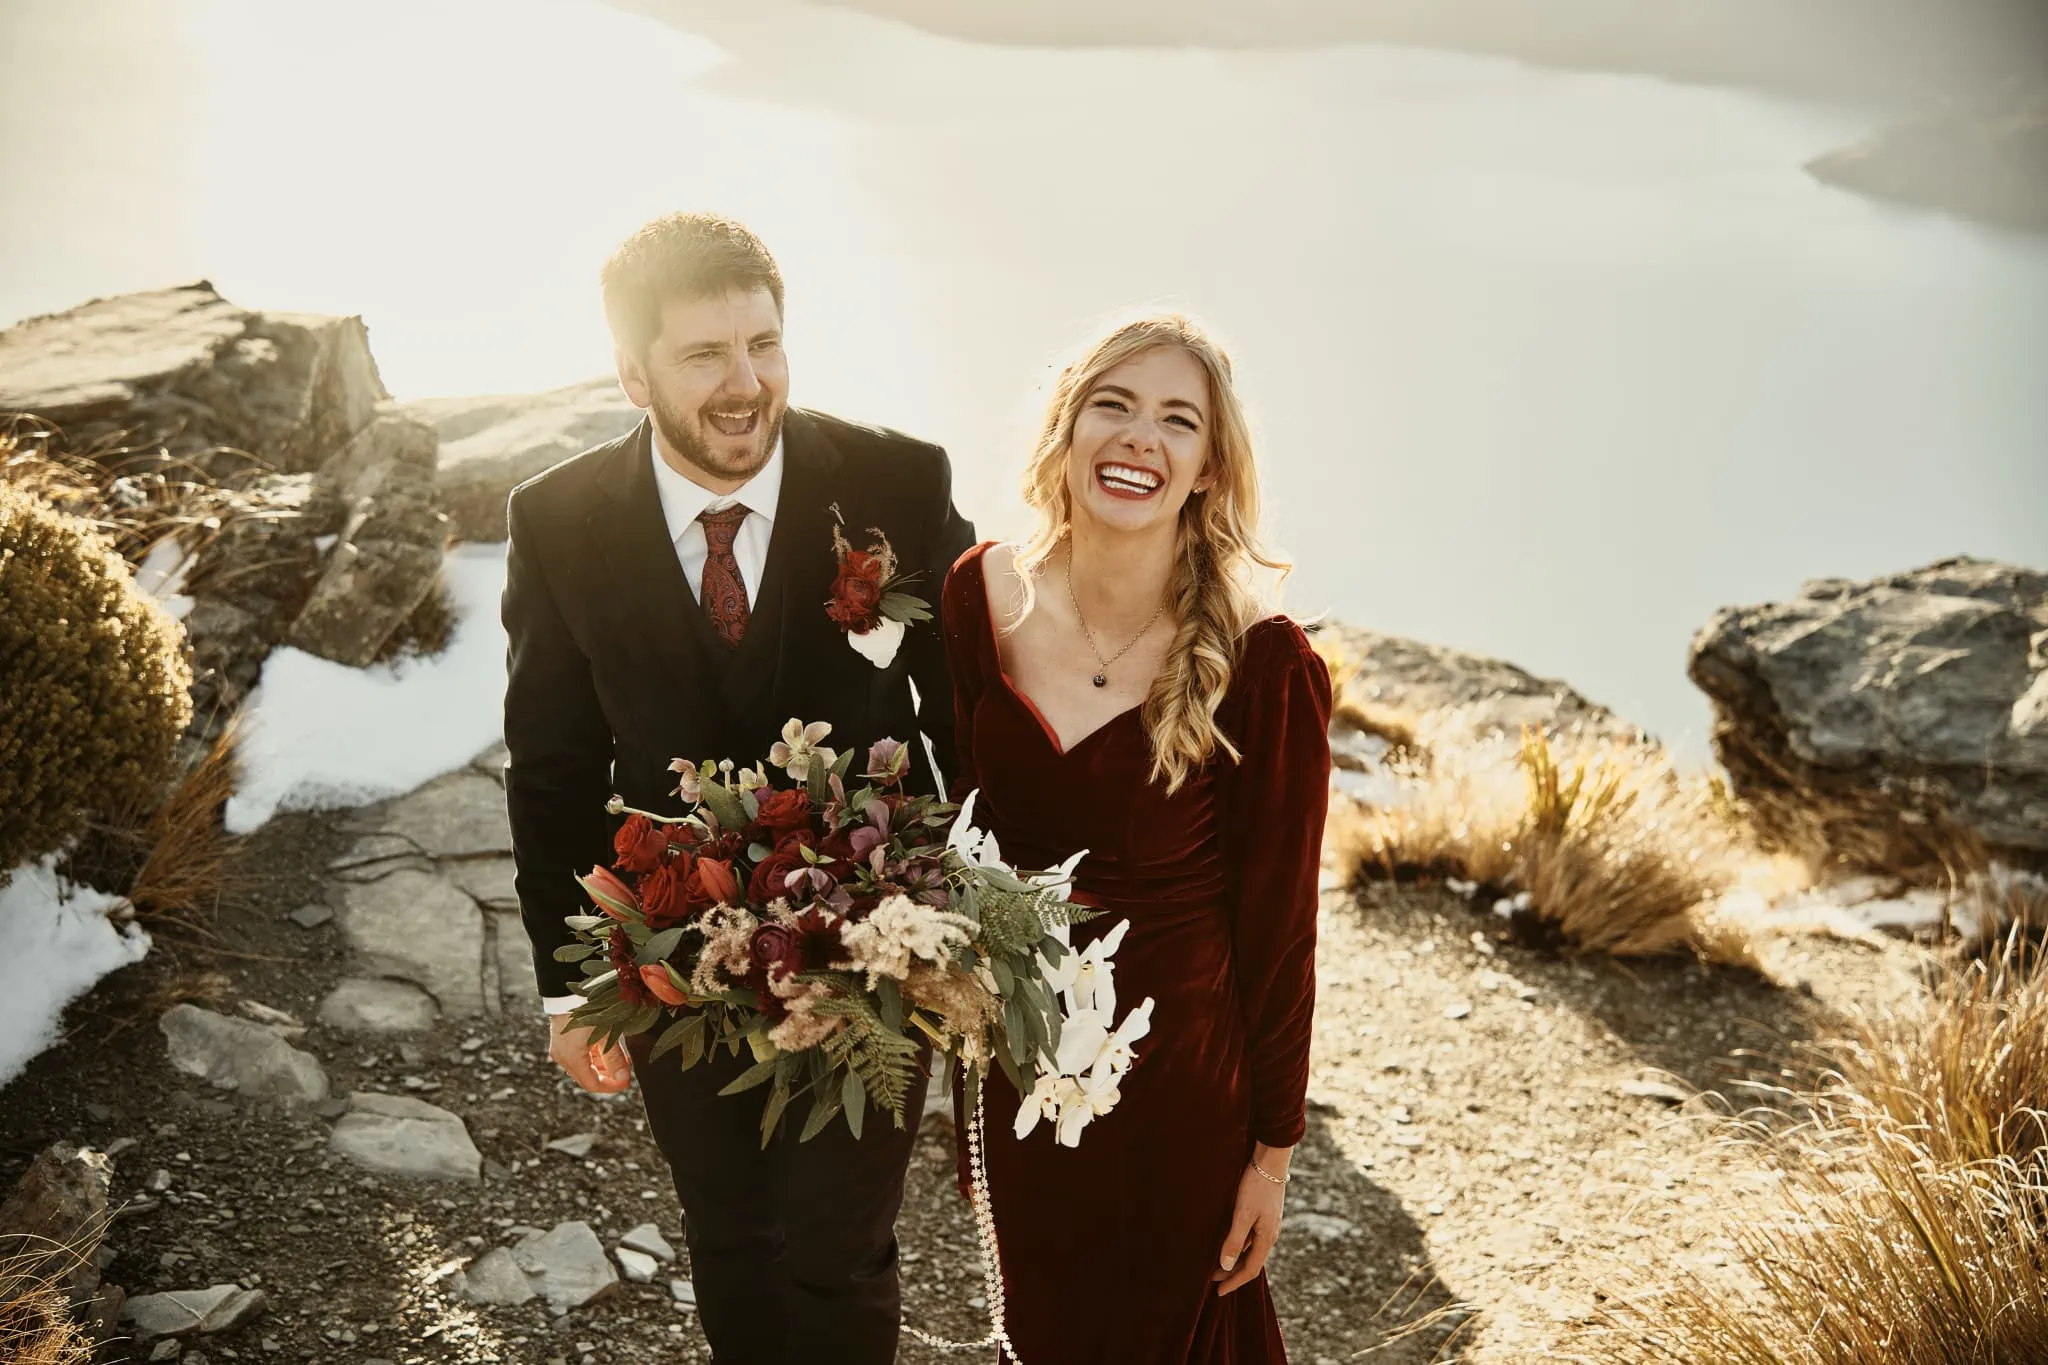 Claire and Rob's heli elopement wedding at Cecil Peak with flowers in their hands.